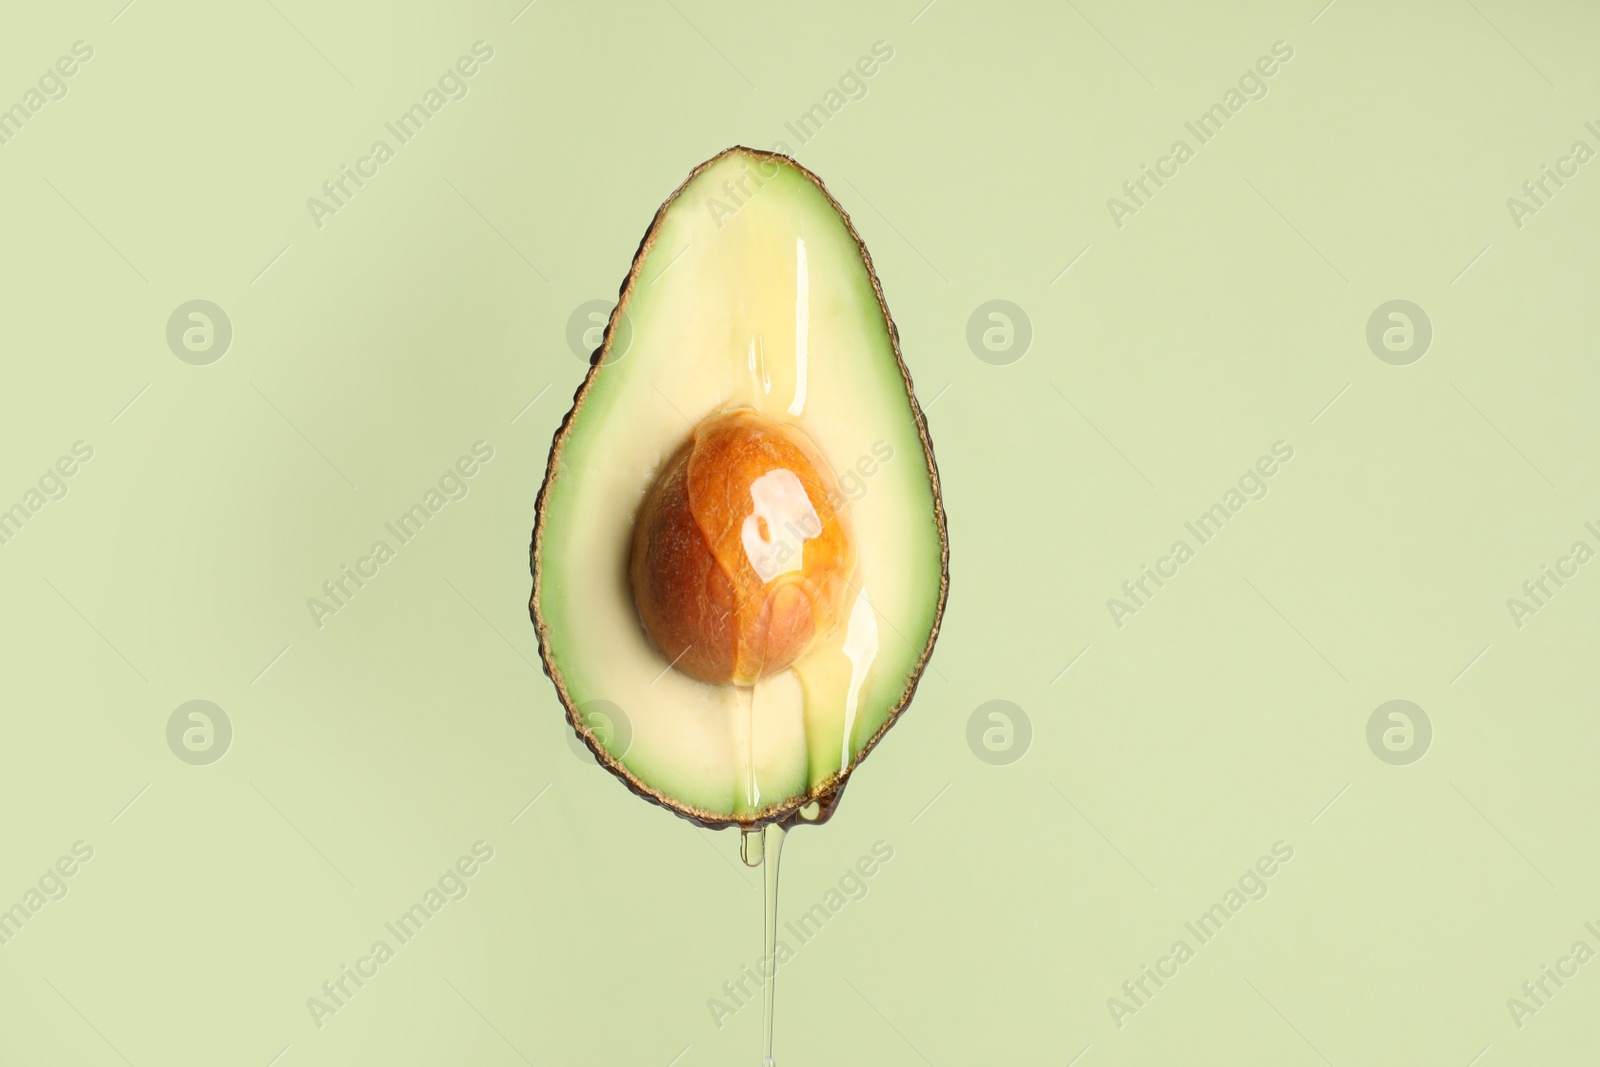 Photo of Pouring essential oil onto cut avocado on light green background